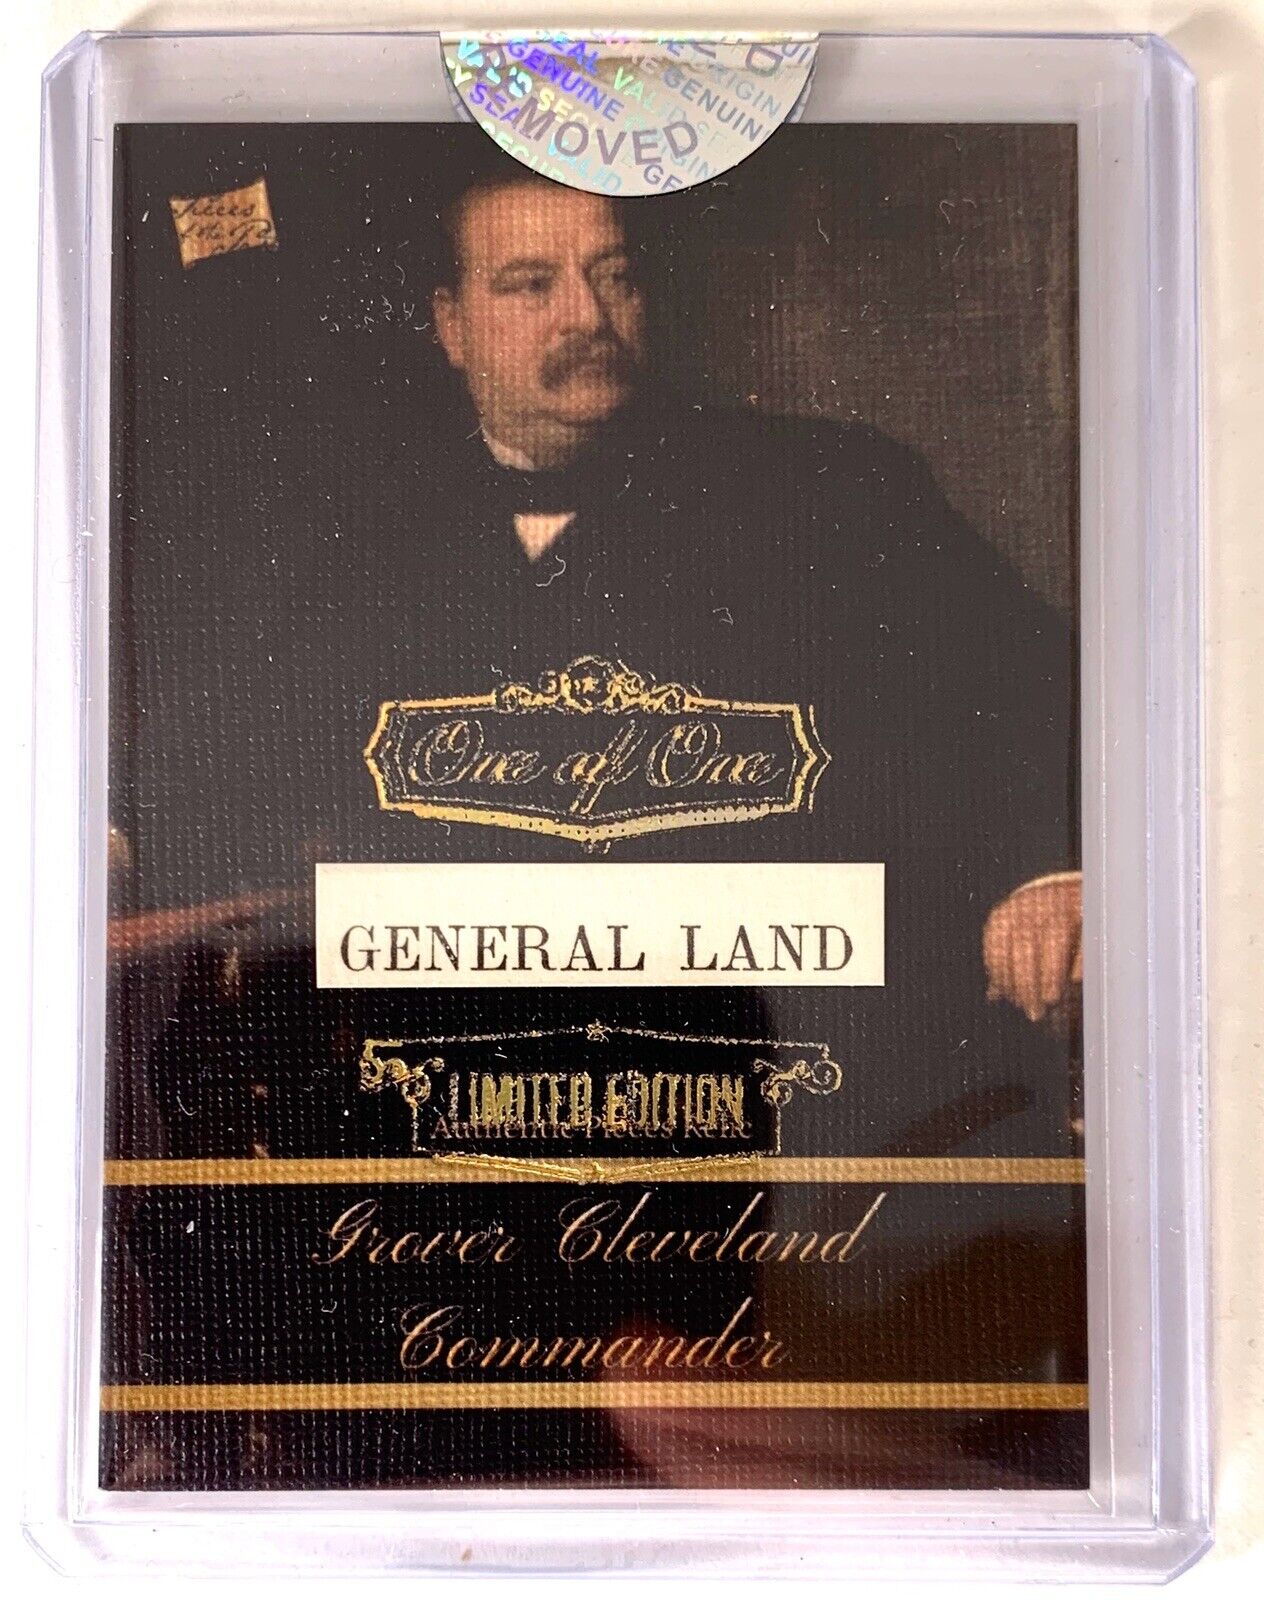 2020 THE BAR PIECES OF THE PAST GROVER CLEVELAND 1/1 LIMITED  AUTHENTIC RELIC